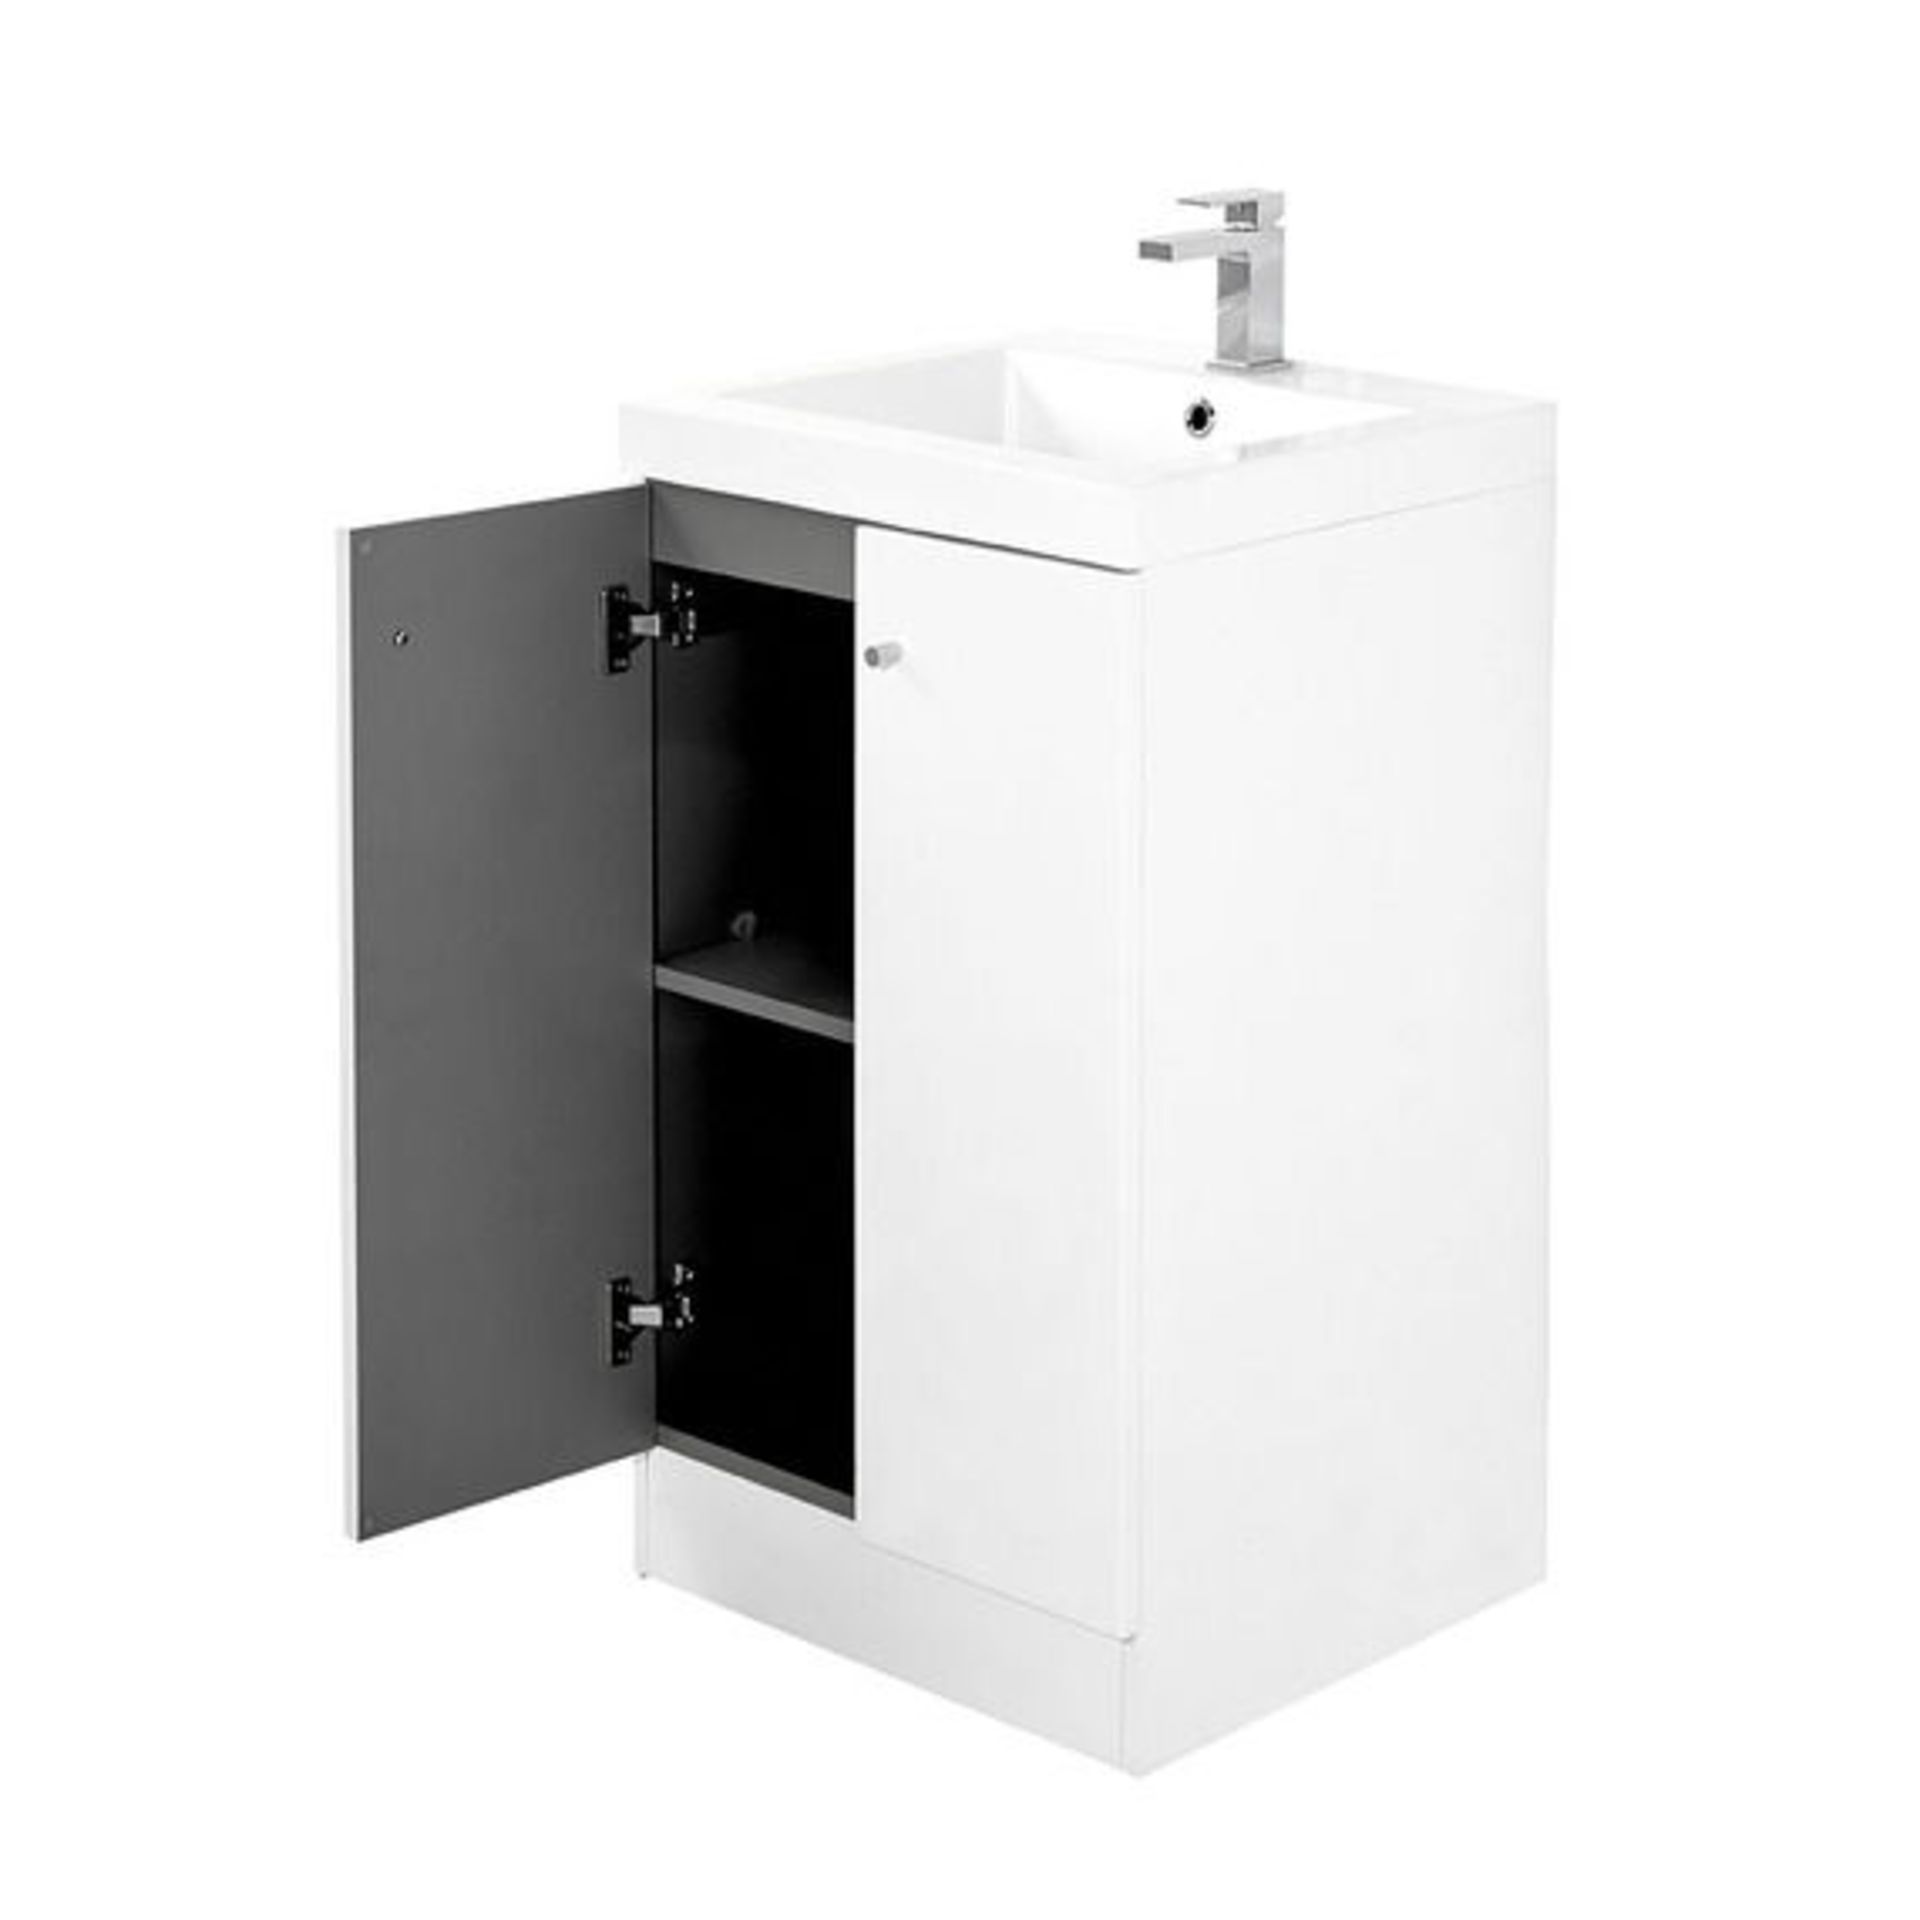 10 x Alpine Duo 500 Floor Standing Vanity unit - Gloss White - Brand New Boxed Stock - Dimensions: - Image 3 of 5